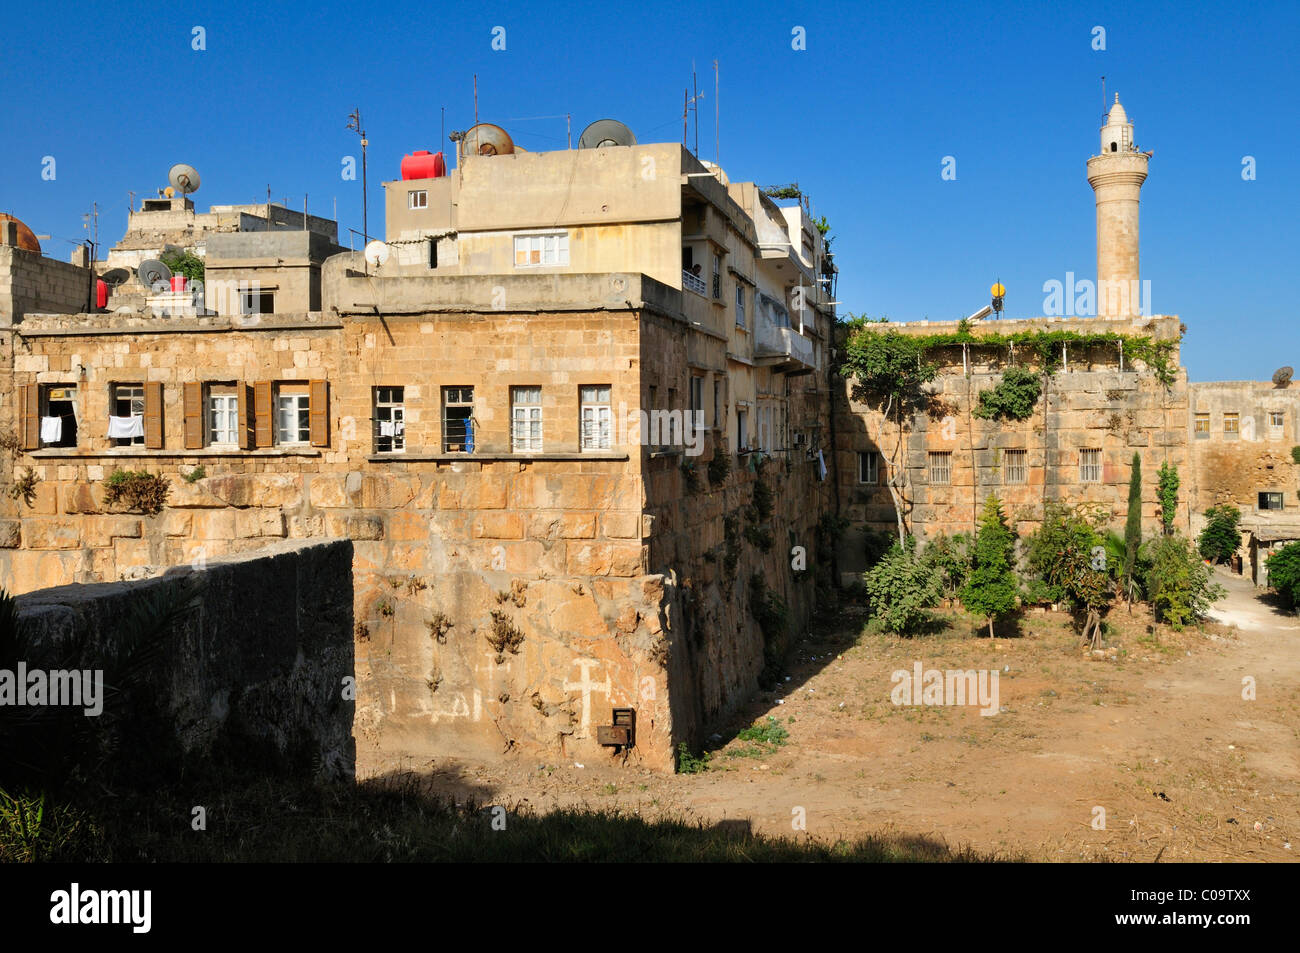 Historic town of the Crusader city of Tartus, Tartous, built on the antique citadel, Syria, Middle East, West Asia Stock Photo